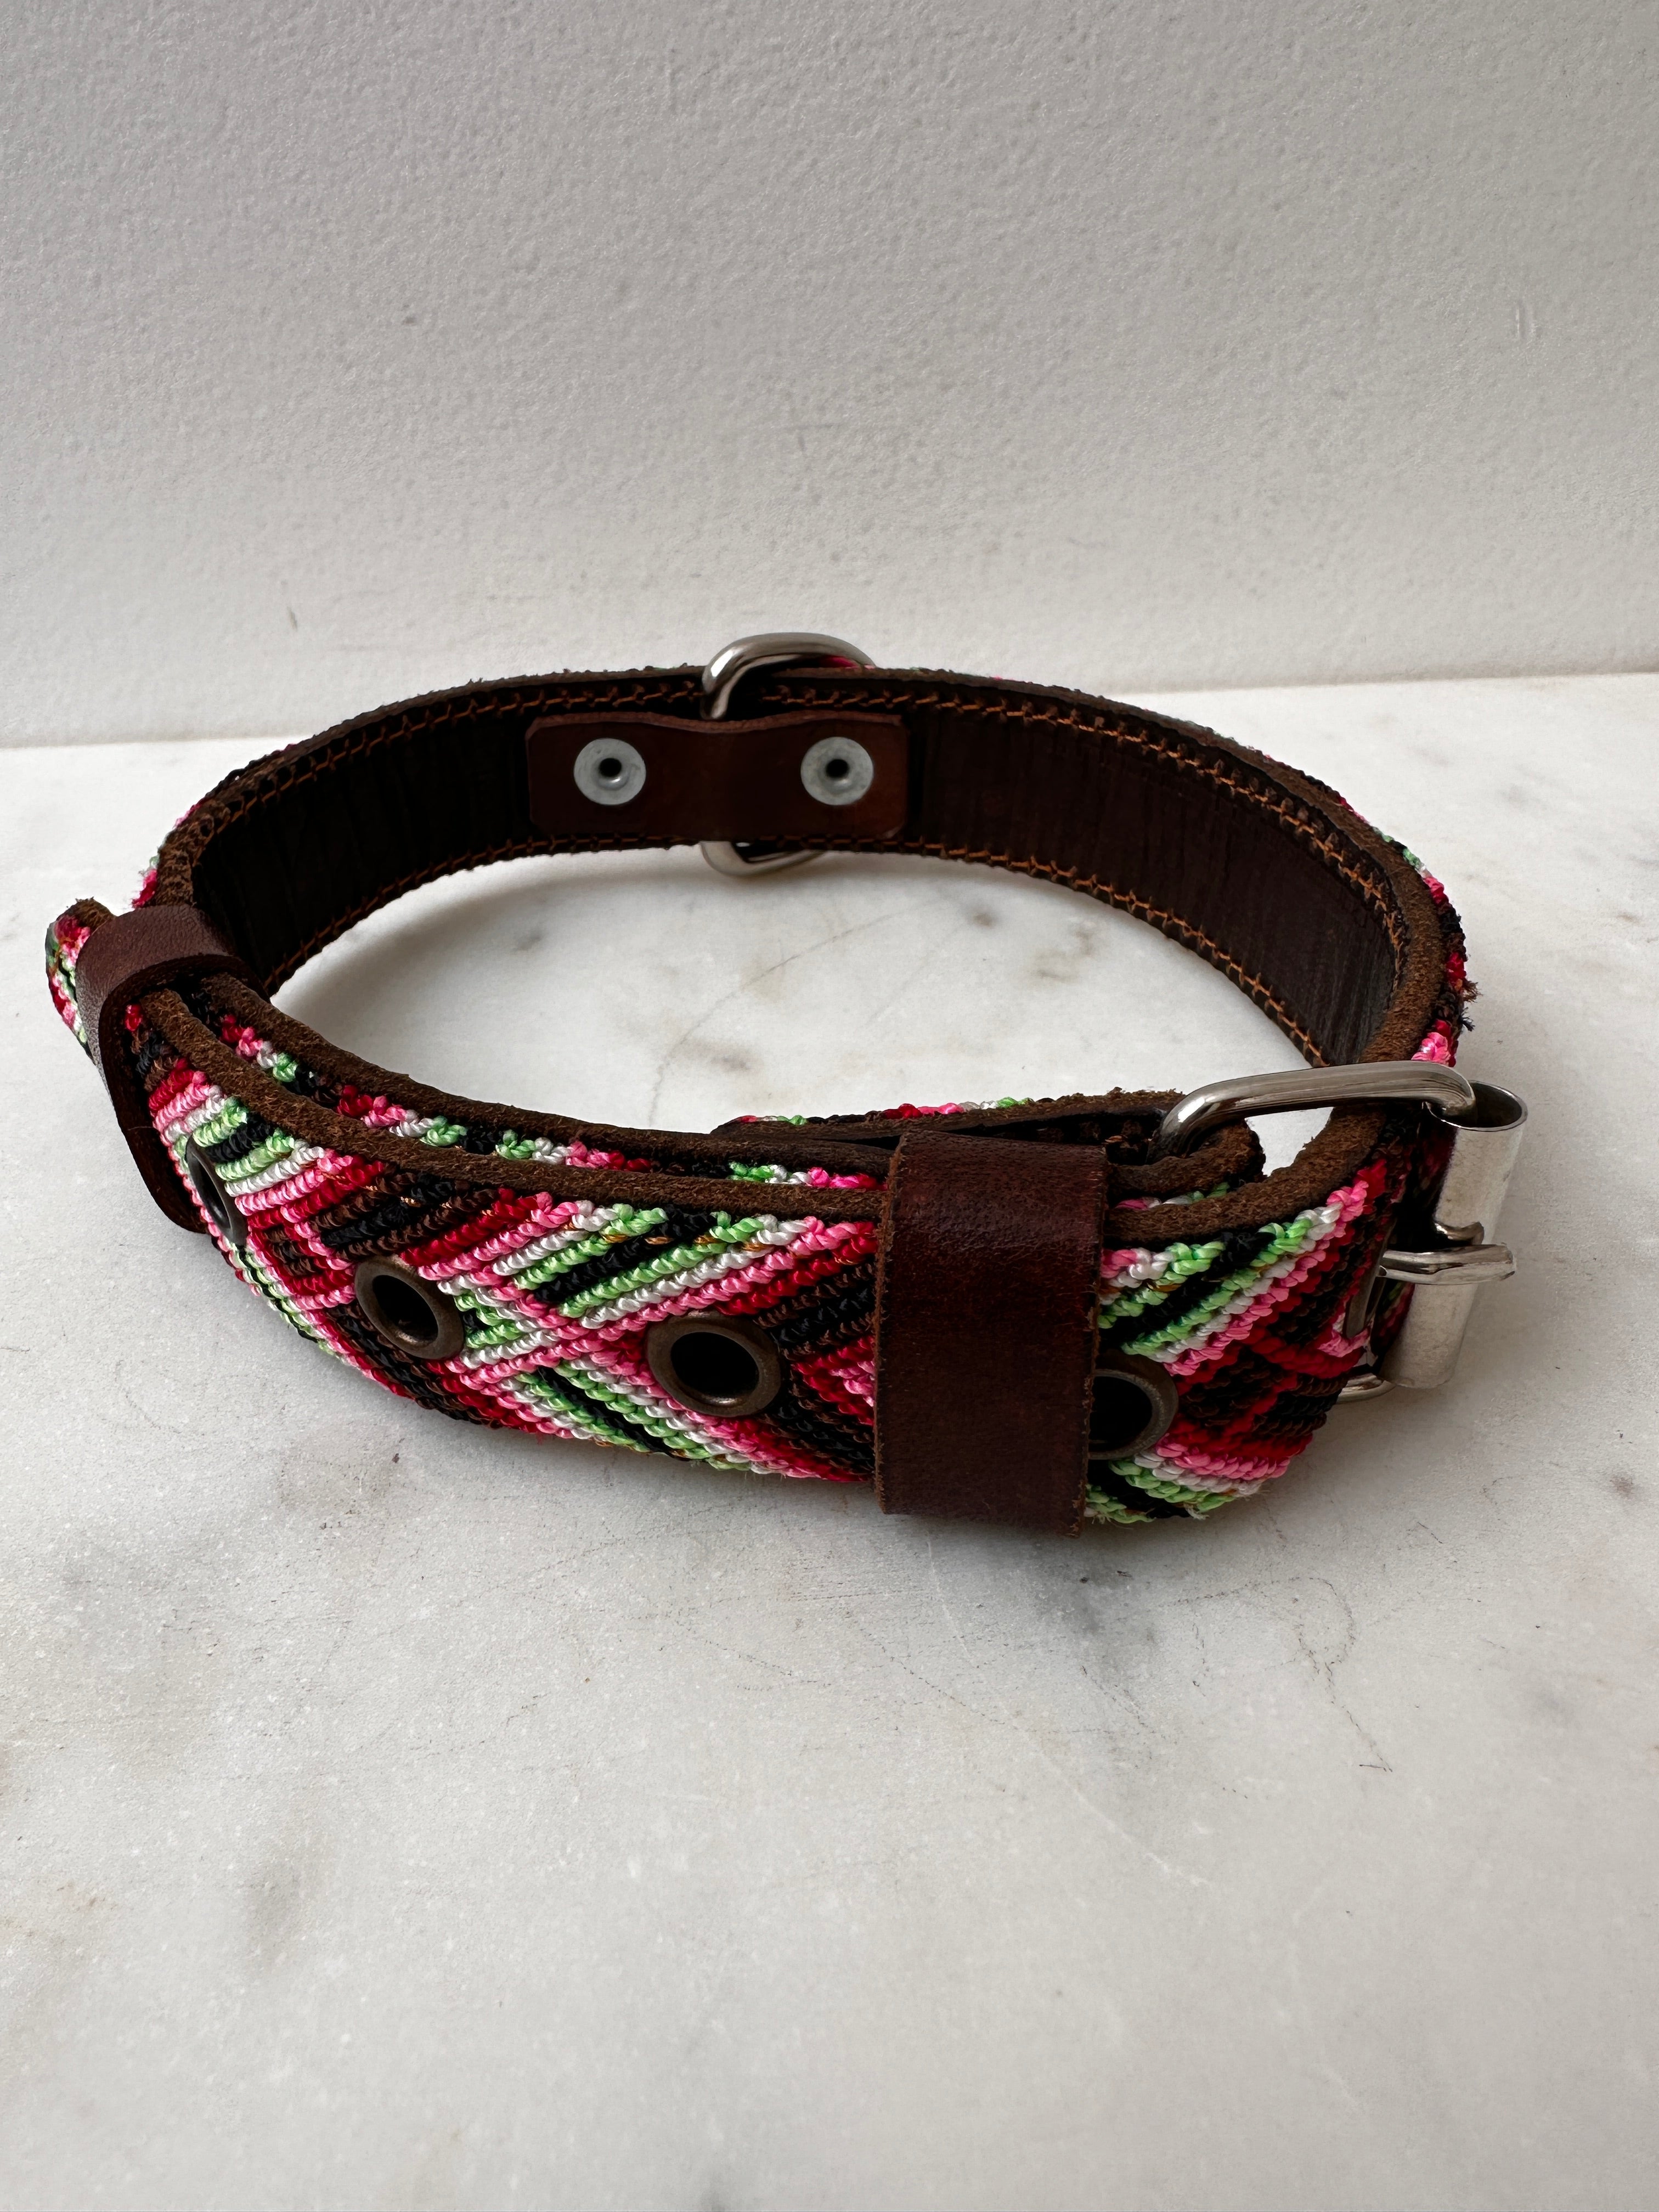 Future Nomads Homewares One Size Huichol Fully Embroidered Dog Collar M3